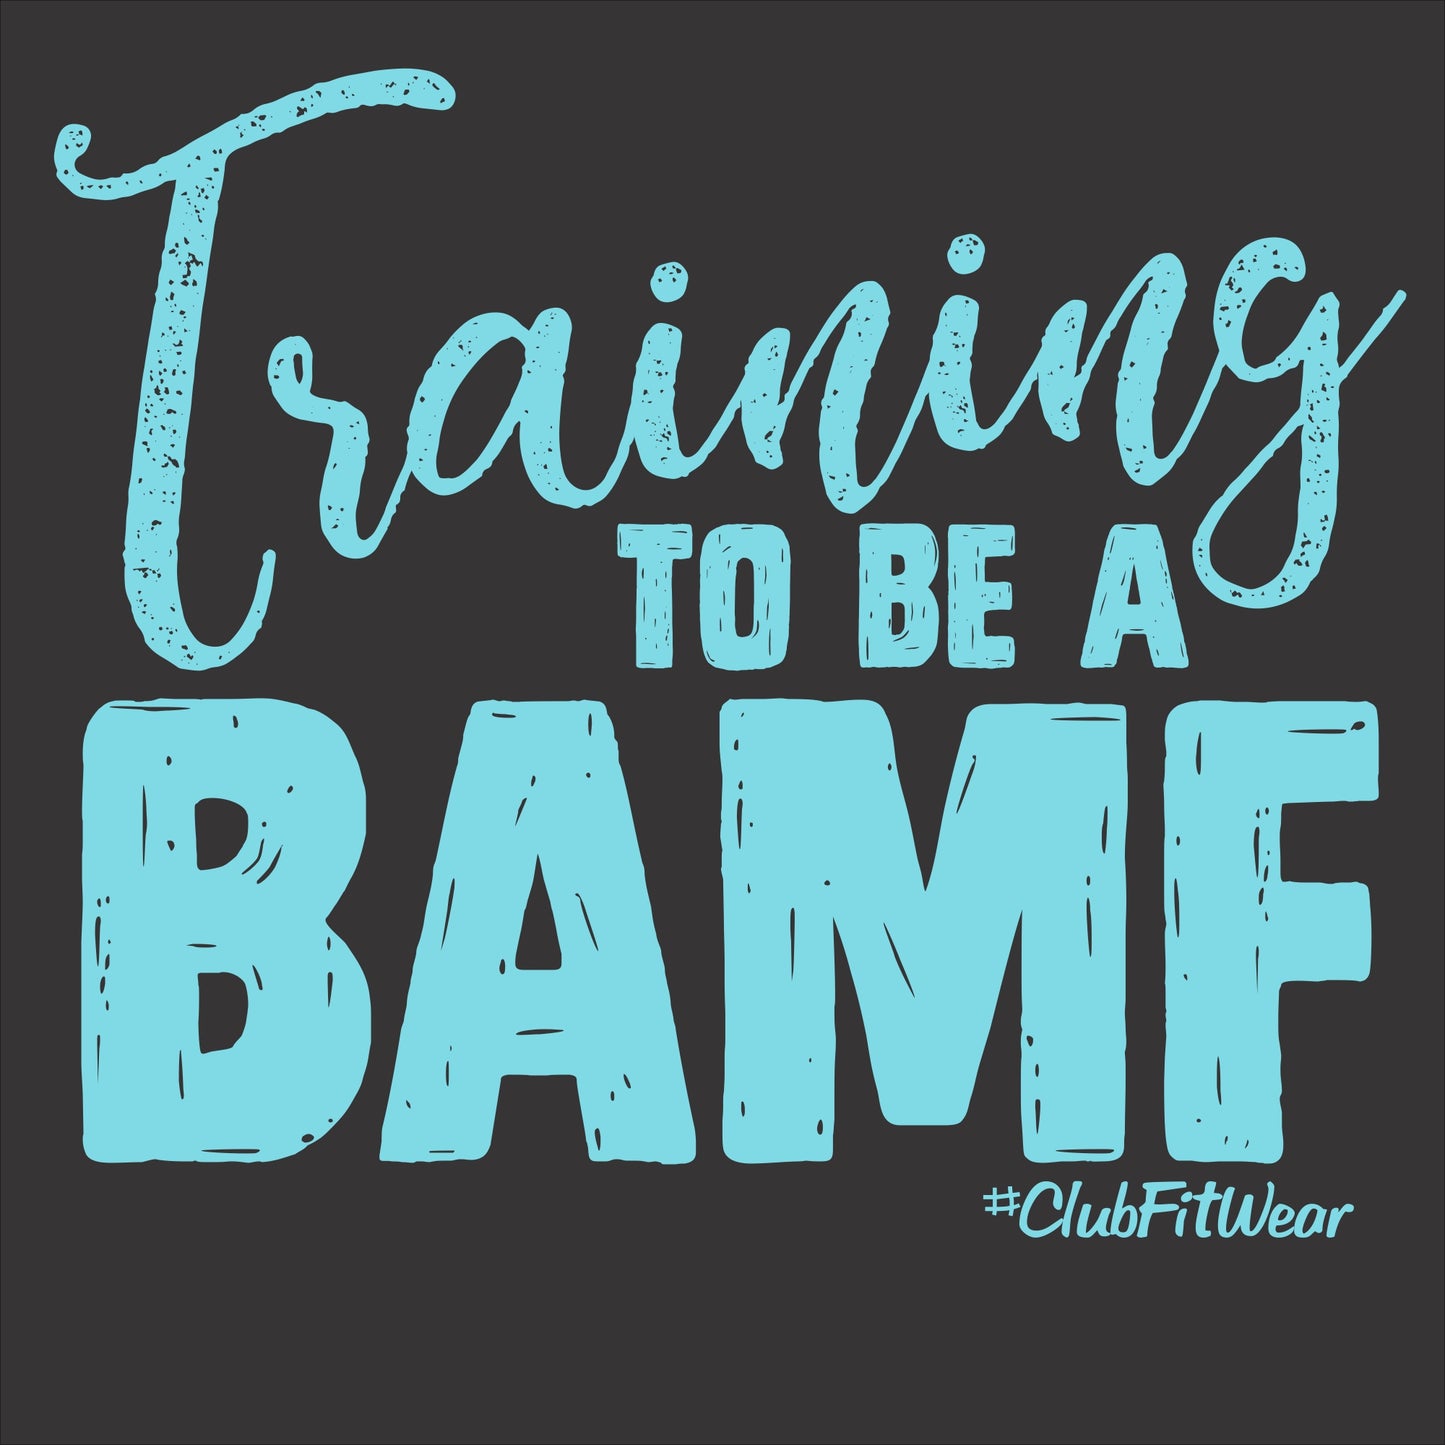 Training to be a BAMF